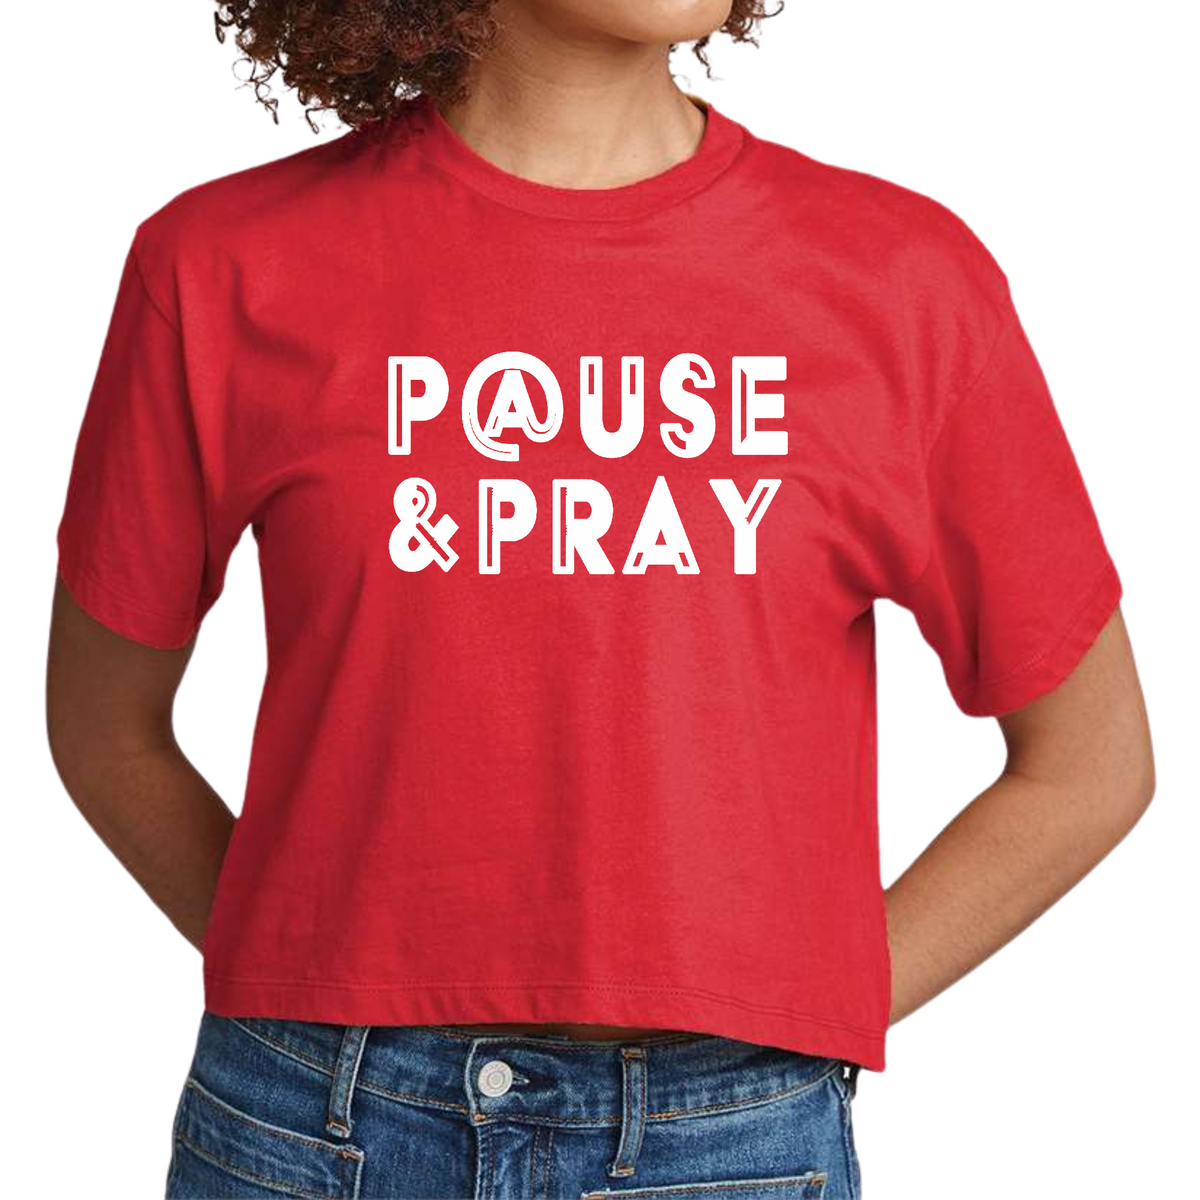 Womens Short Sleeve Cropped T-Shirt, Pause And Pray, Christian by inQue.Style